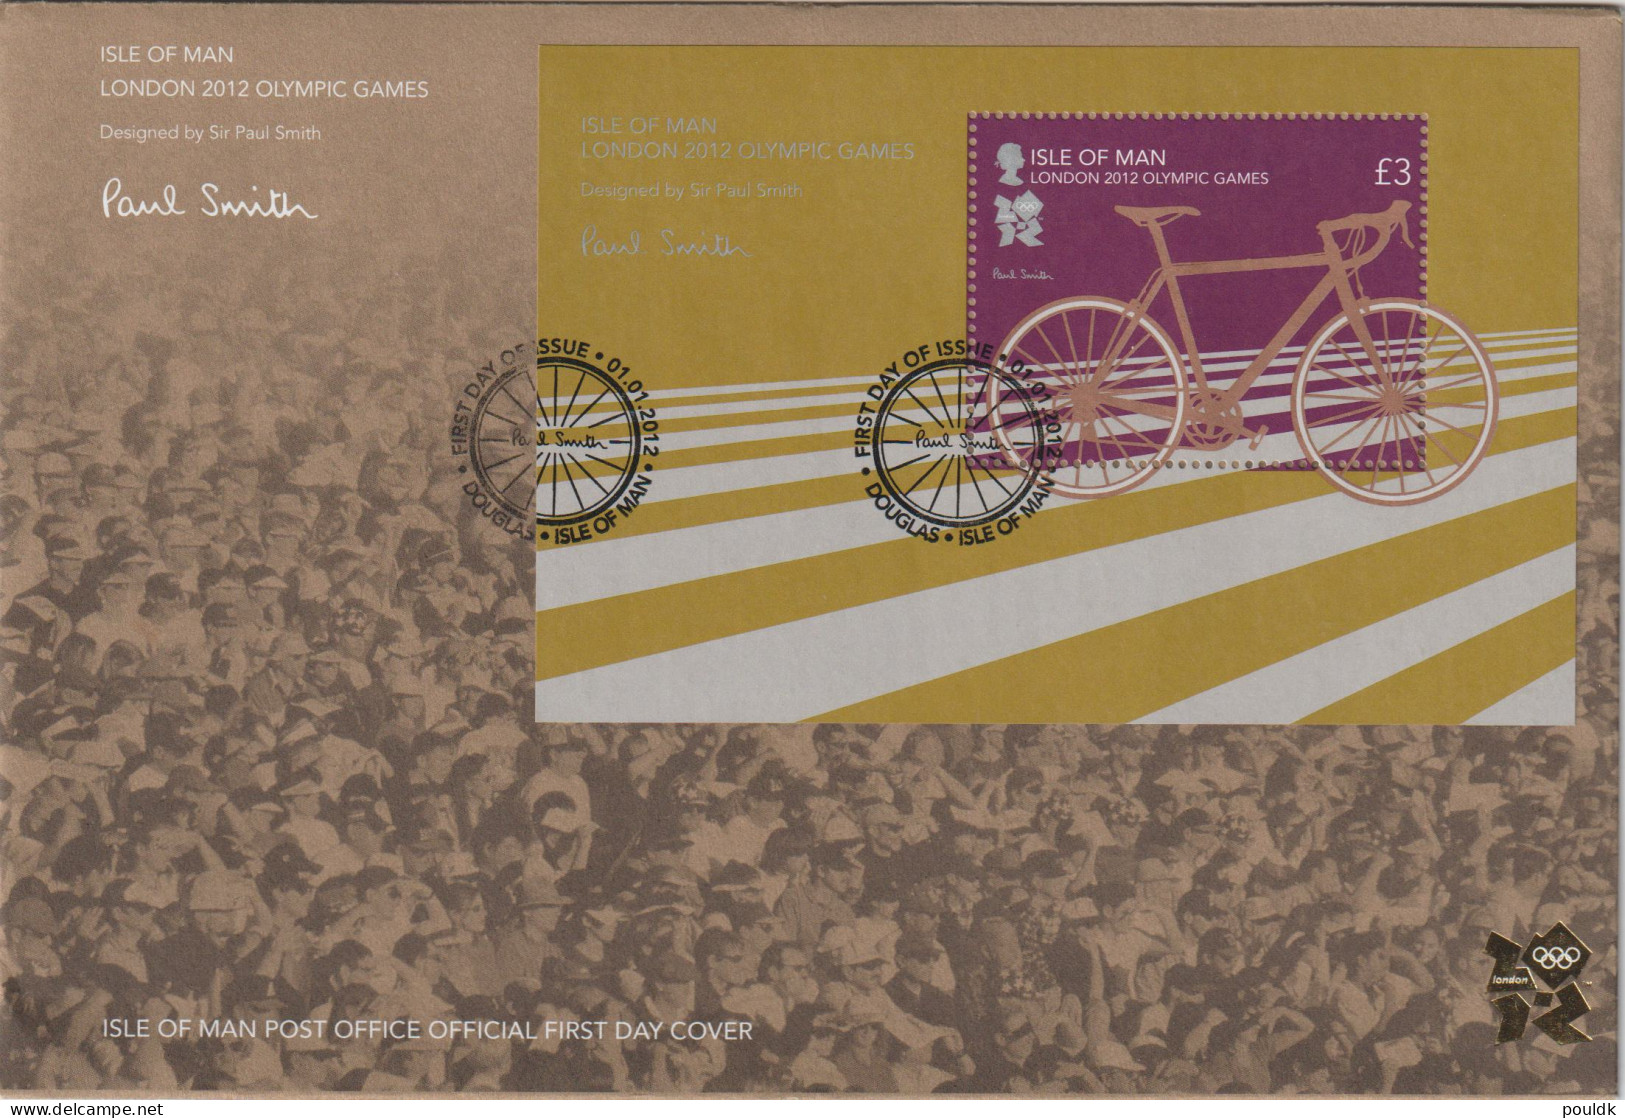 Isle Of Man 2012 Olympic Games London Souvenir Sheet FDC. Weight 0,04 Kg. Please Read Sales Conditions Under - Verano 2012: Londres